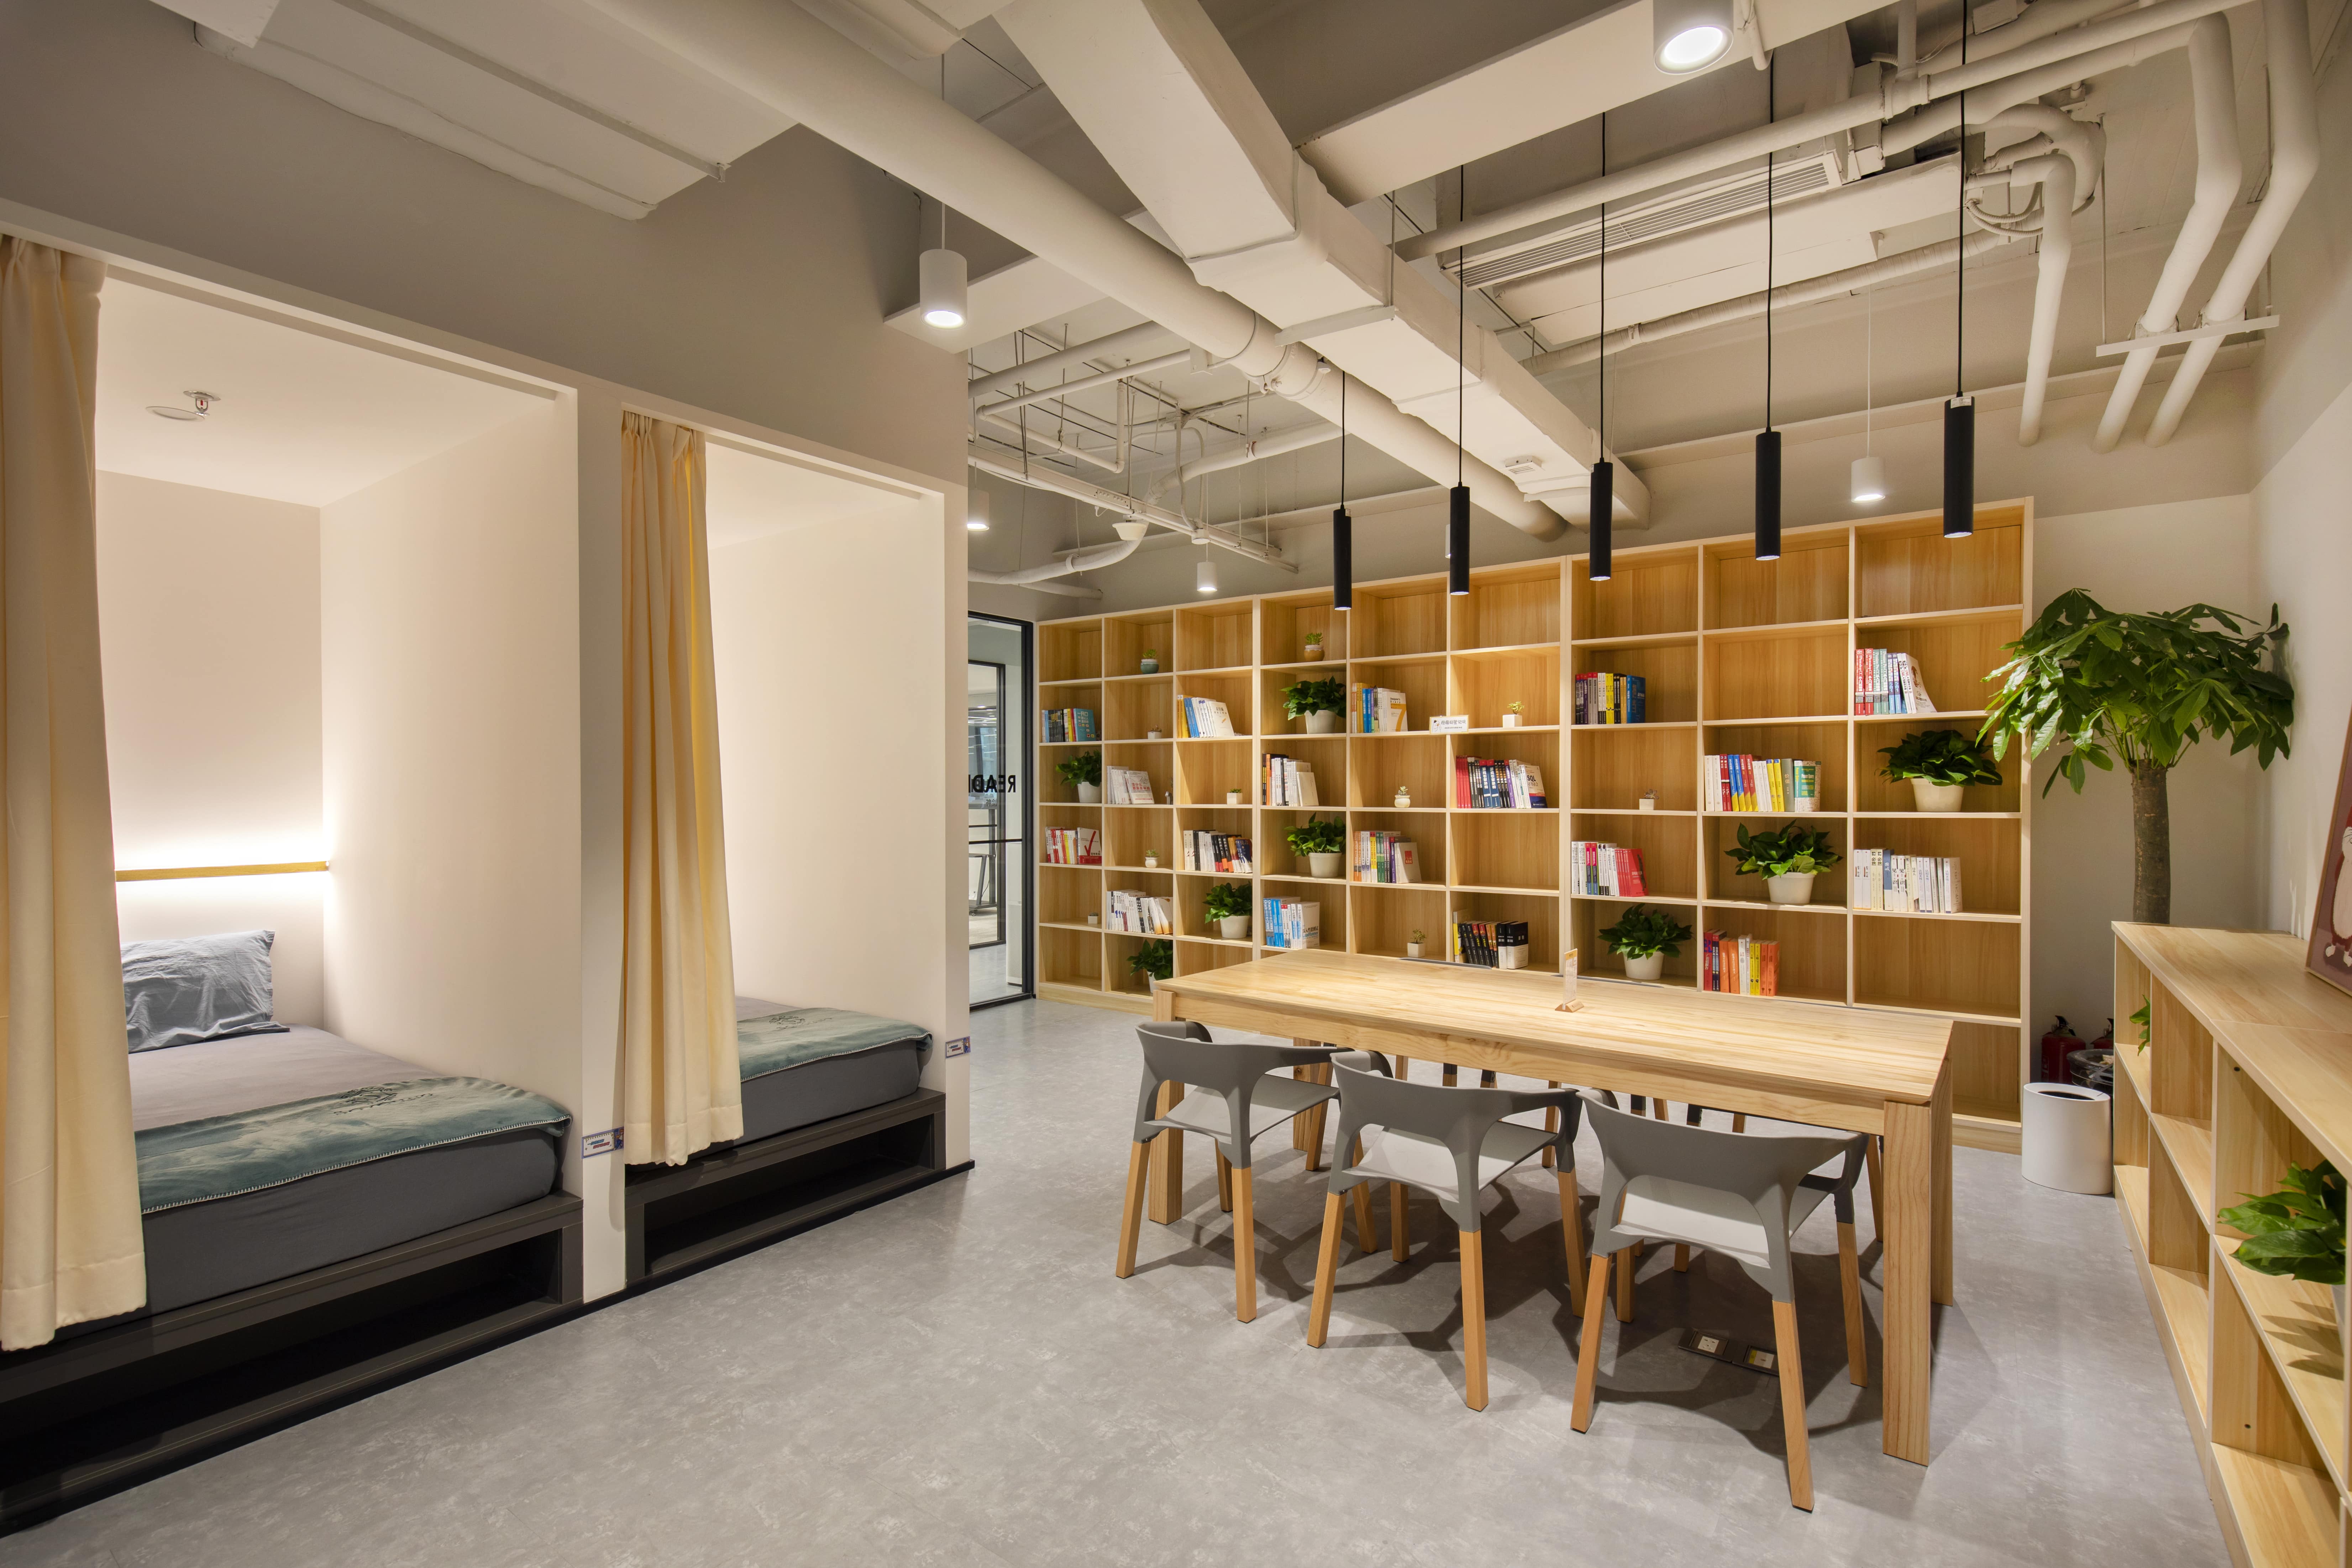 Space Matrix designed and built the Bole Games Beijing workplace to have an entire floor of employee-centric facilities such as a library and nap rooms